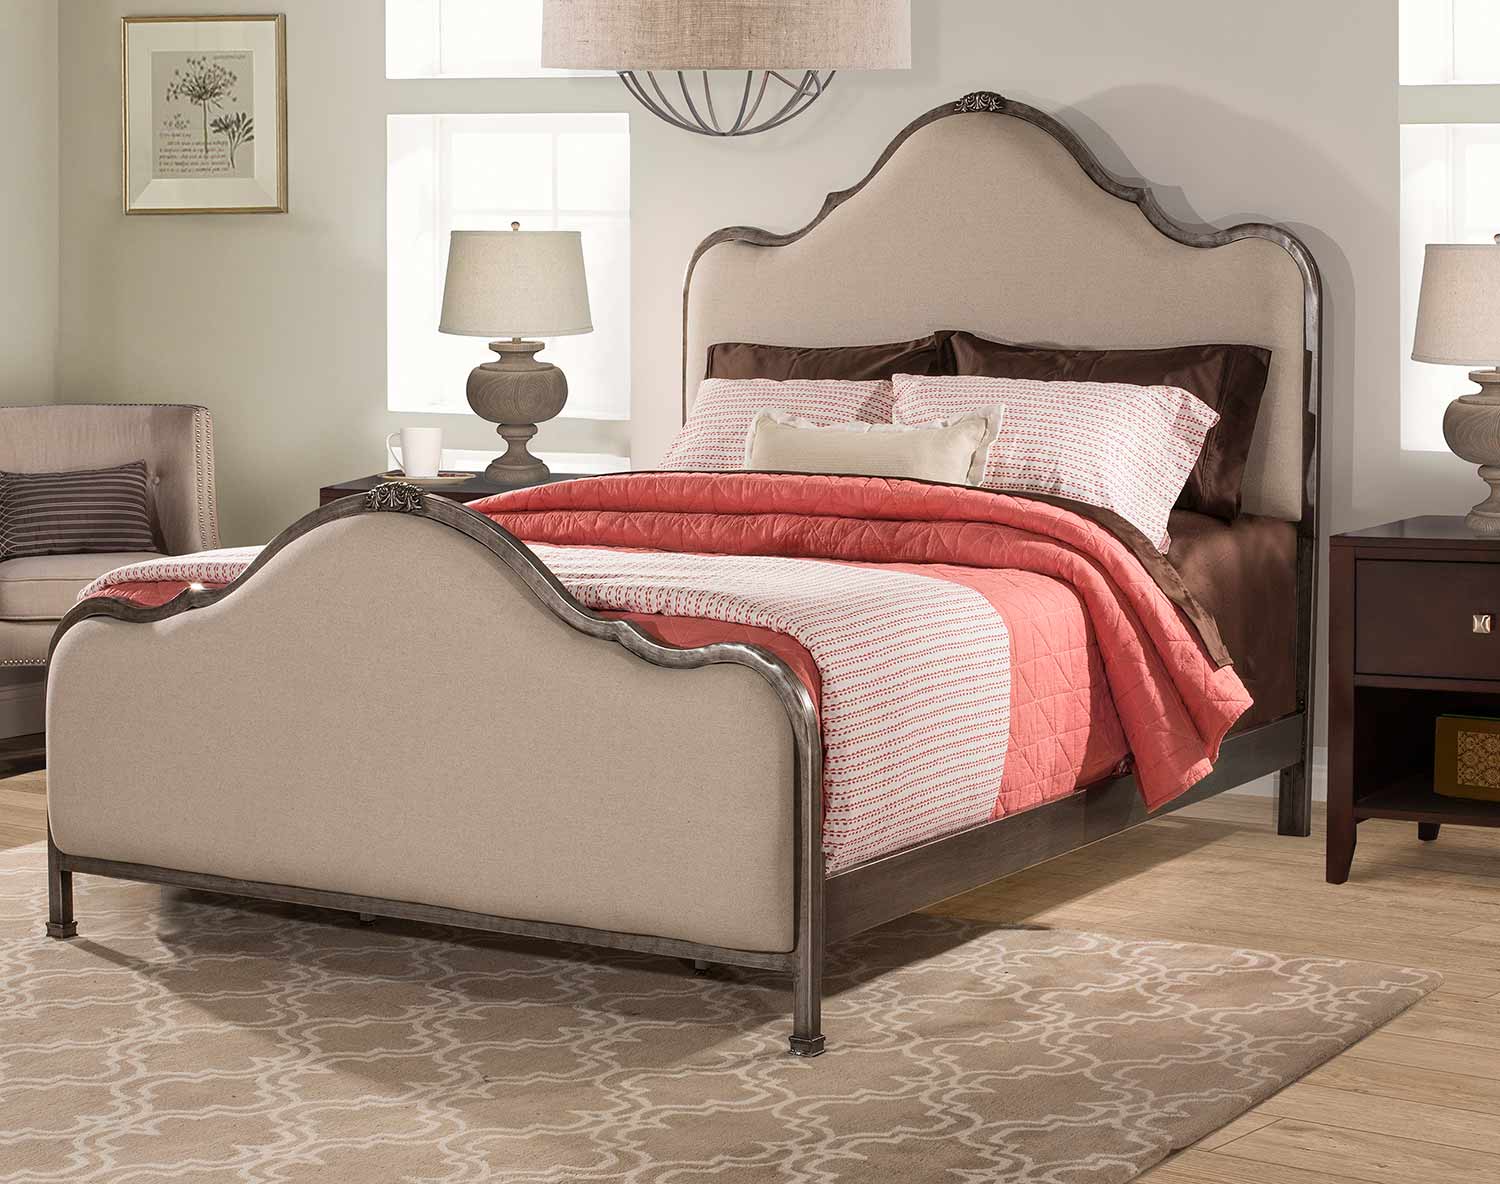 Hillsdale Delray Bed - Aged Steel